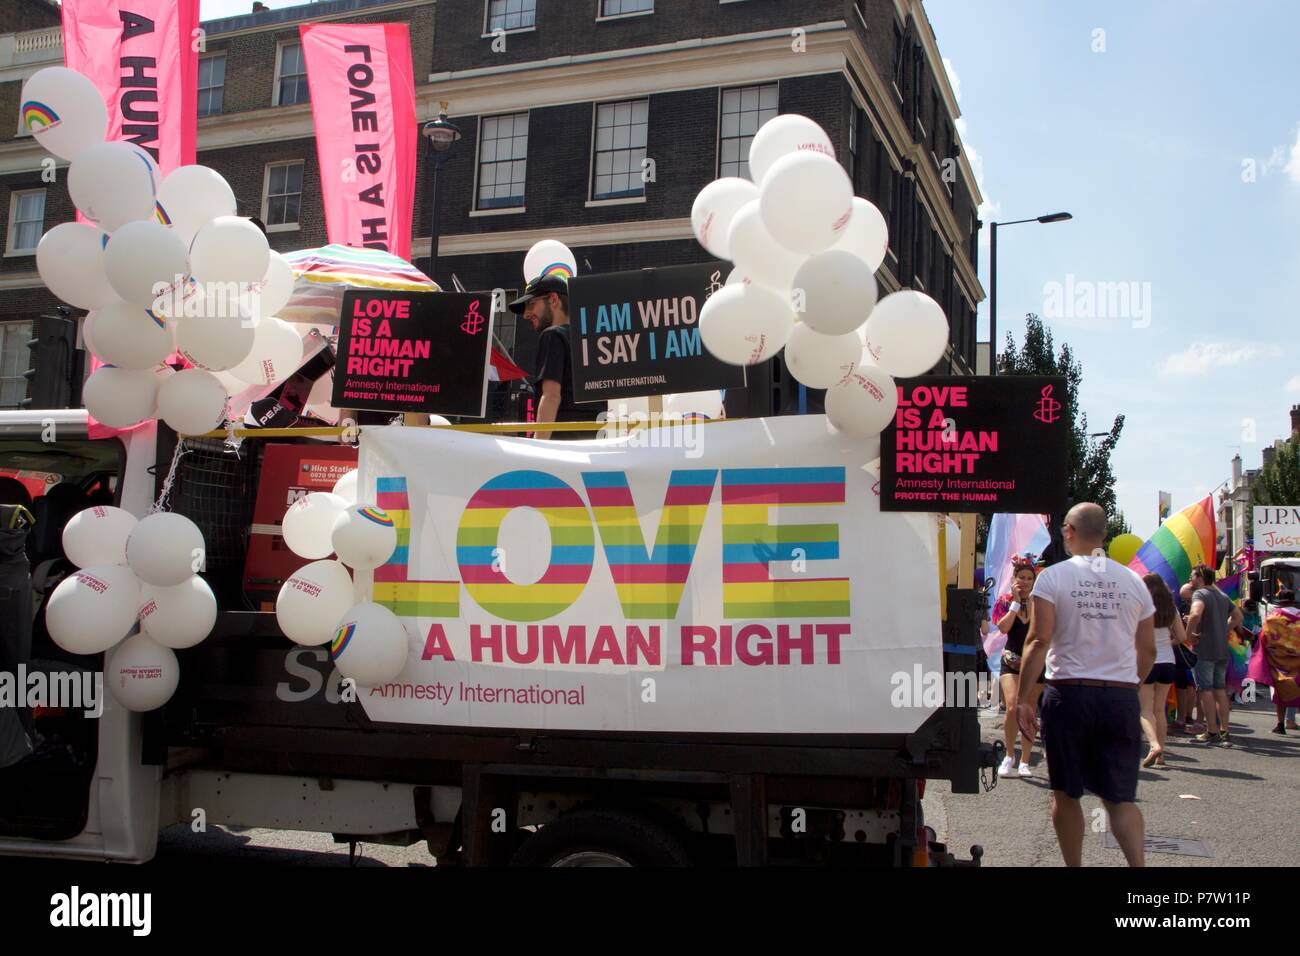 London, UK. 7th July 2018. Amnesty International float which says 'Love is a human right' in Pride in London 2018 Parade, joining more than 1 million attending the march today to celebrate LGBT+. Credit: Dimple Patel/Alamy Live News Stock Photo